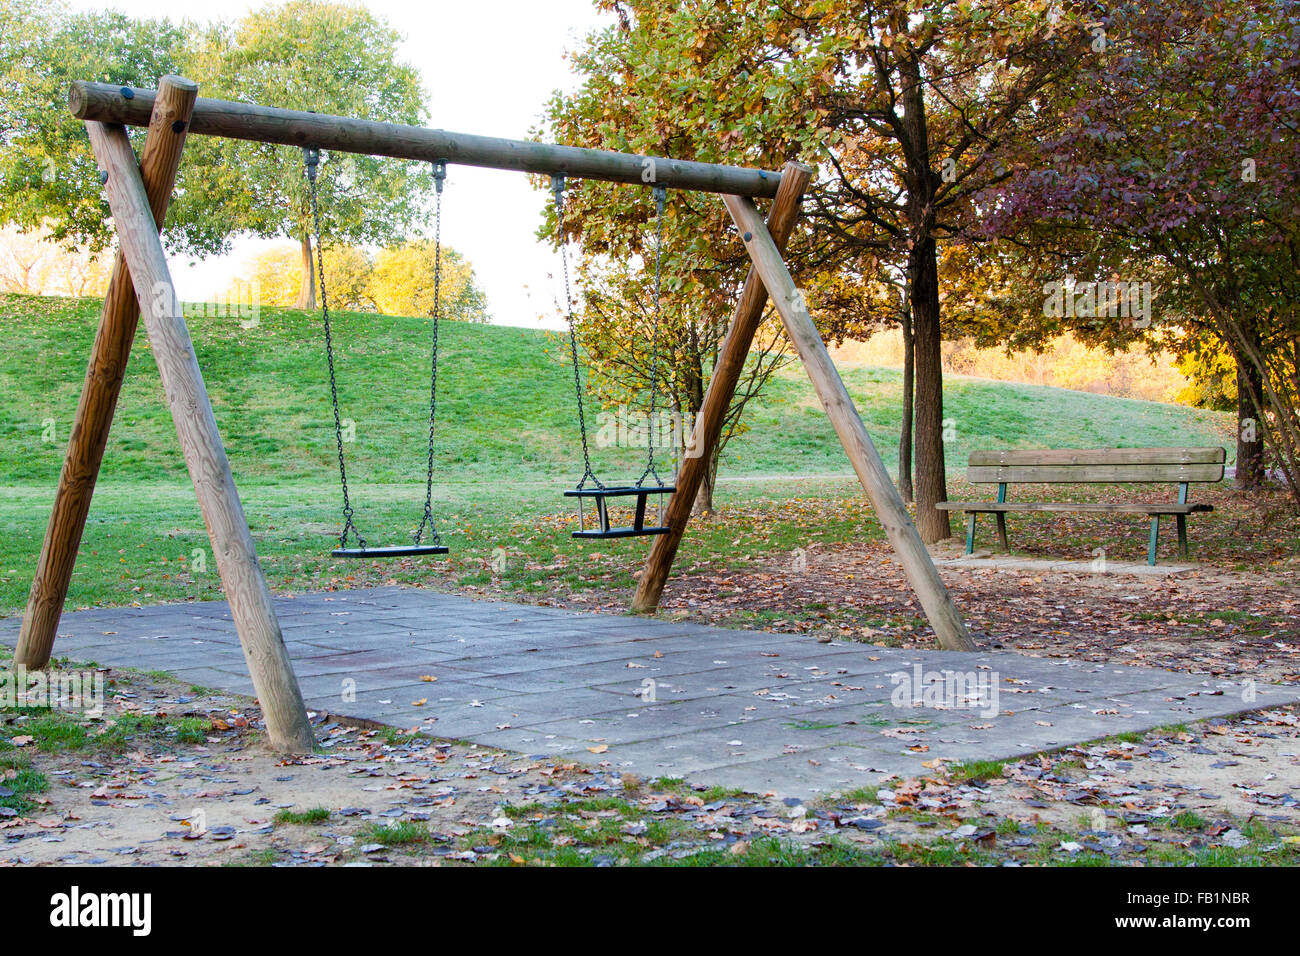 Swing and bench in a park with fallen leaves Stock Photo